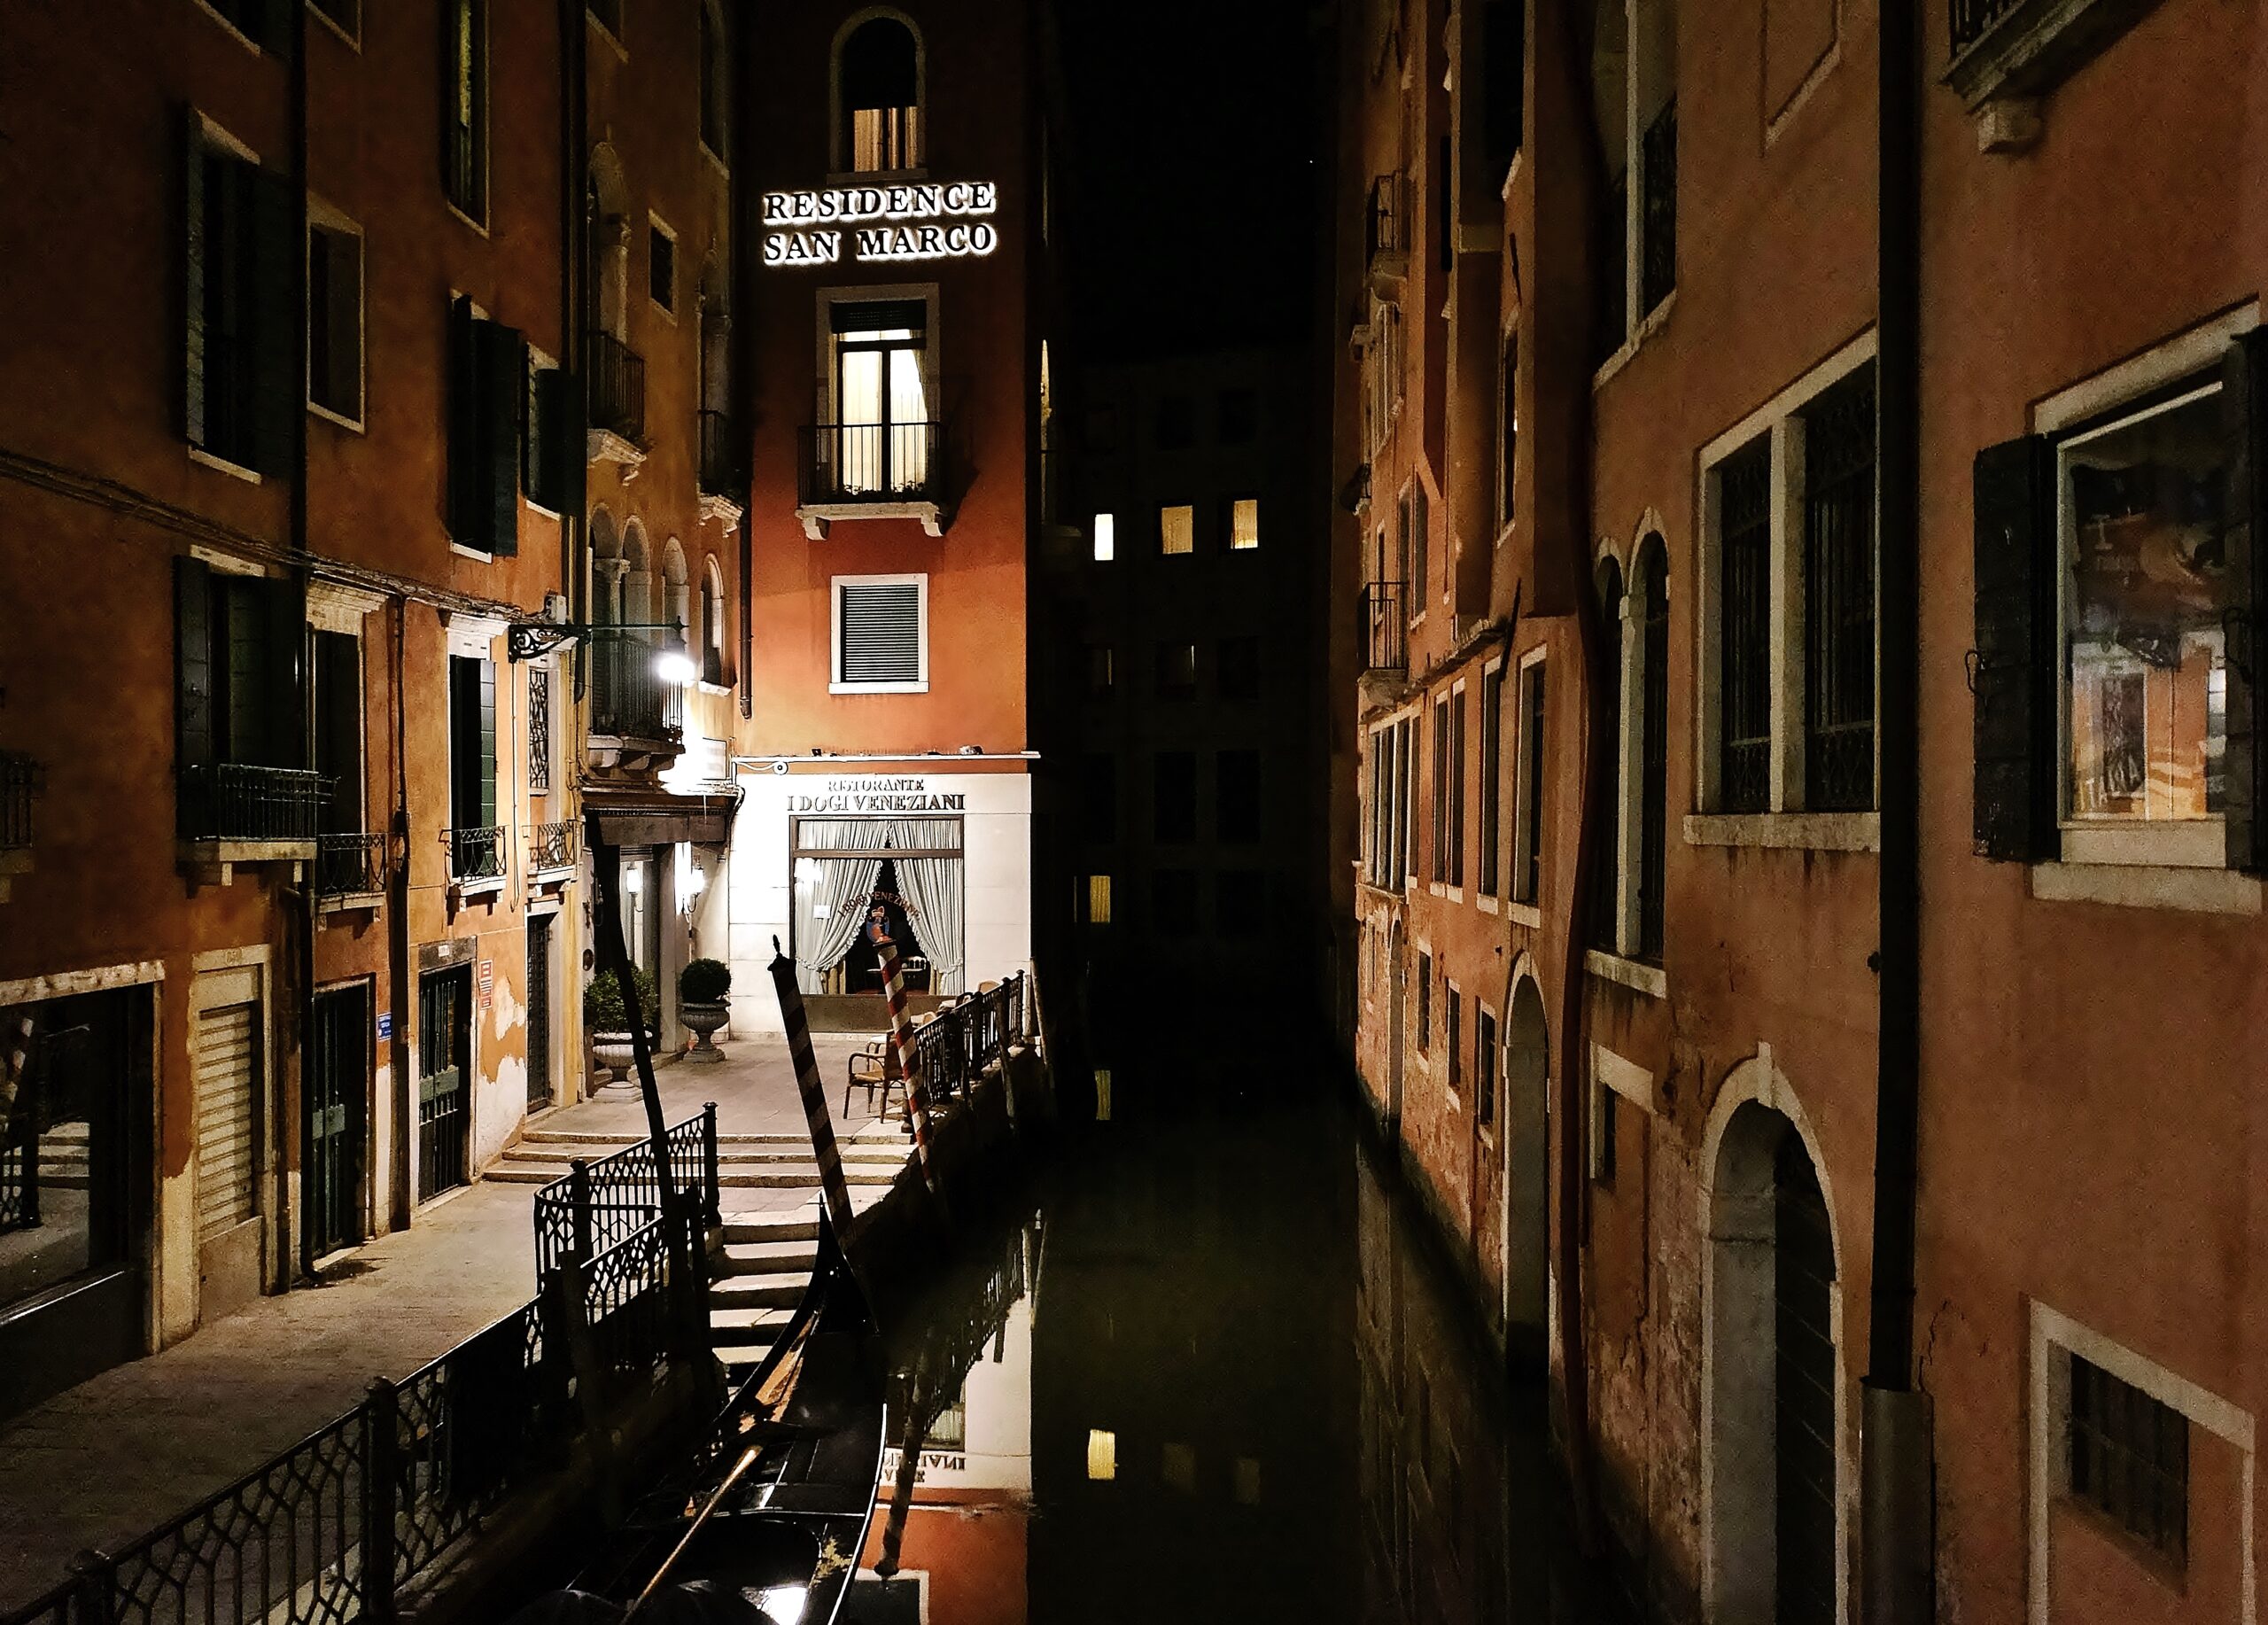 Waterway in the night time, Venice, Italy